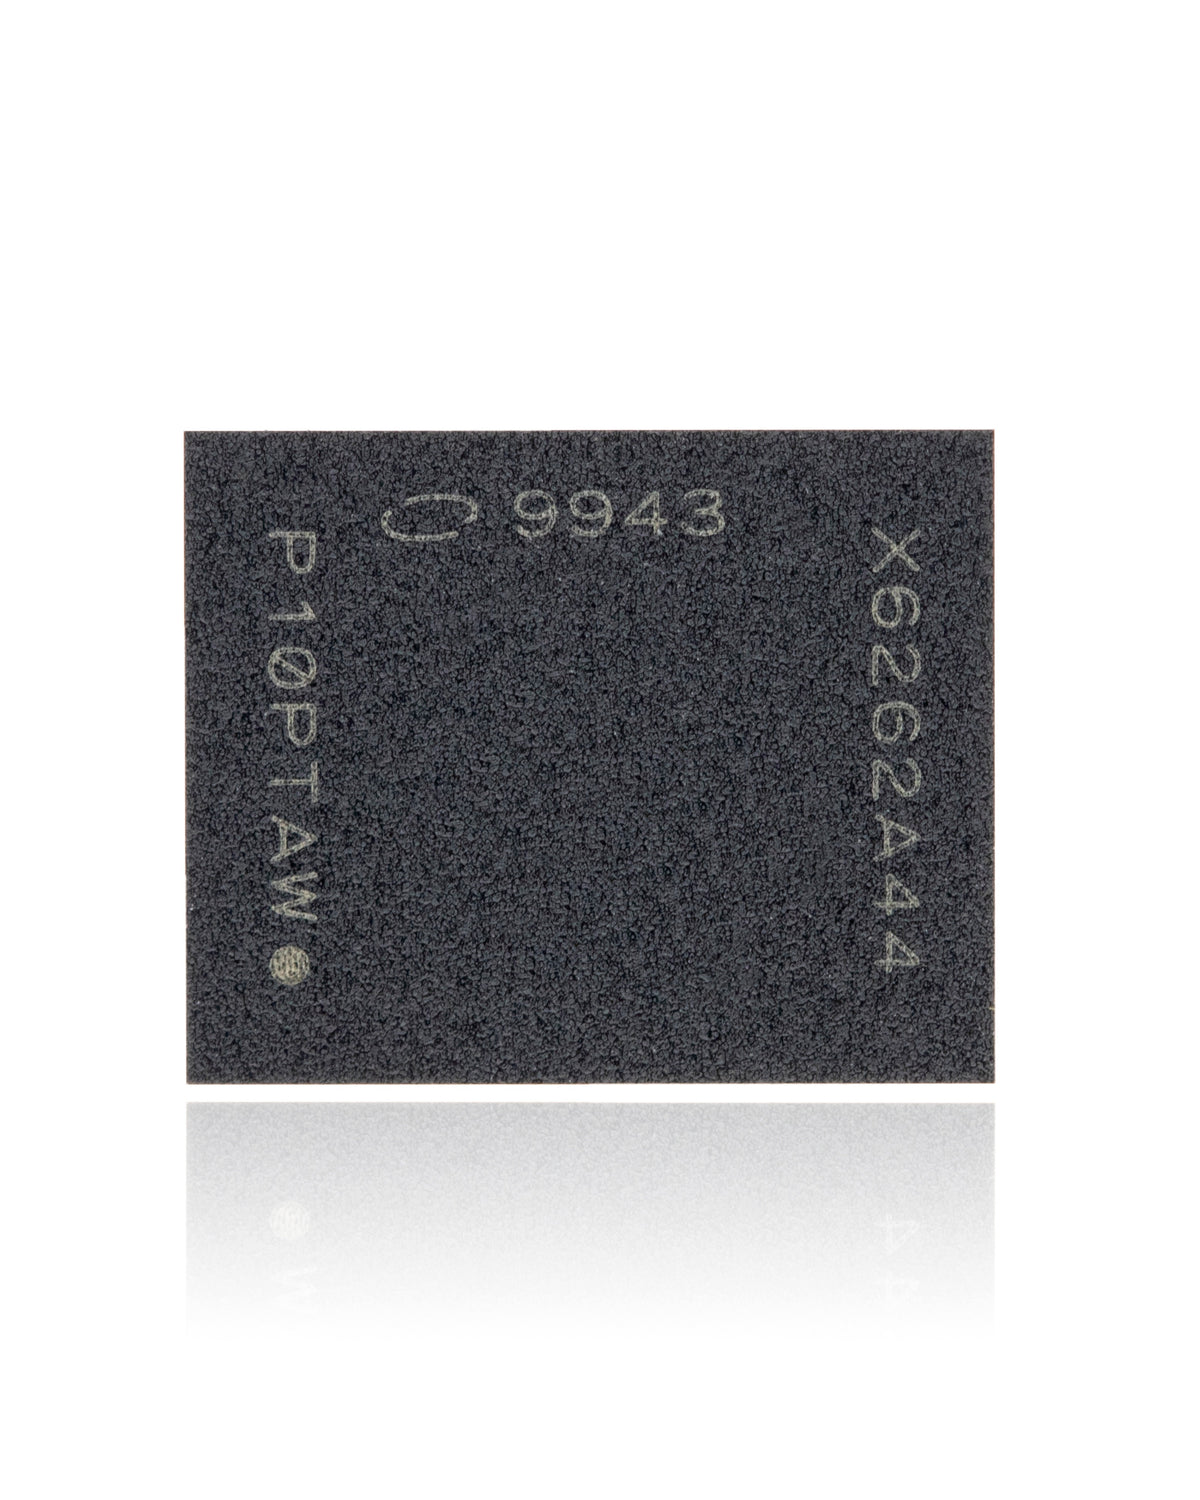 BASEBAND CPU IC CHIP COMPATIBLE WITH IPHONE 7 / 7 PLUS (INTEL: 9943 BB_RF_9943)